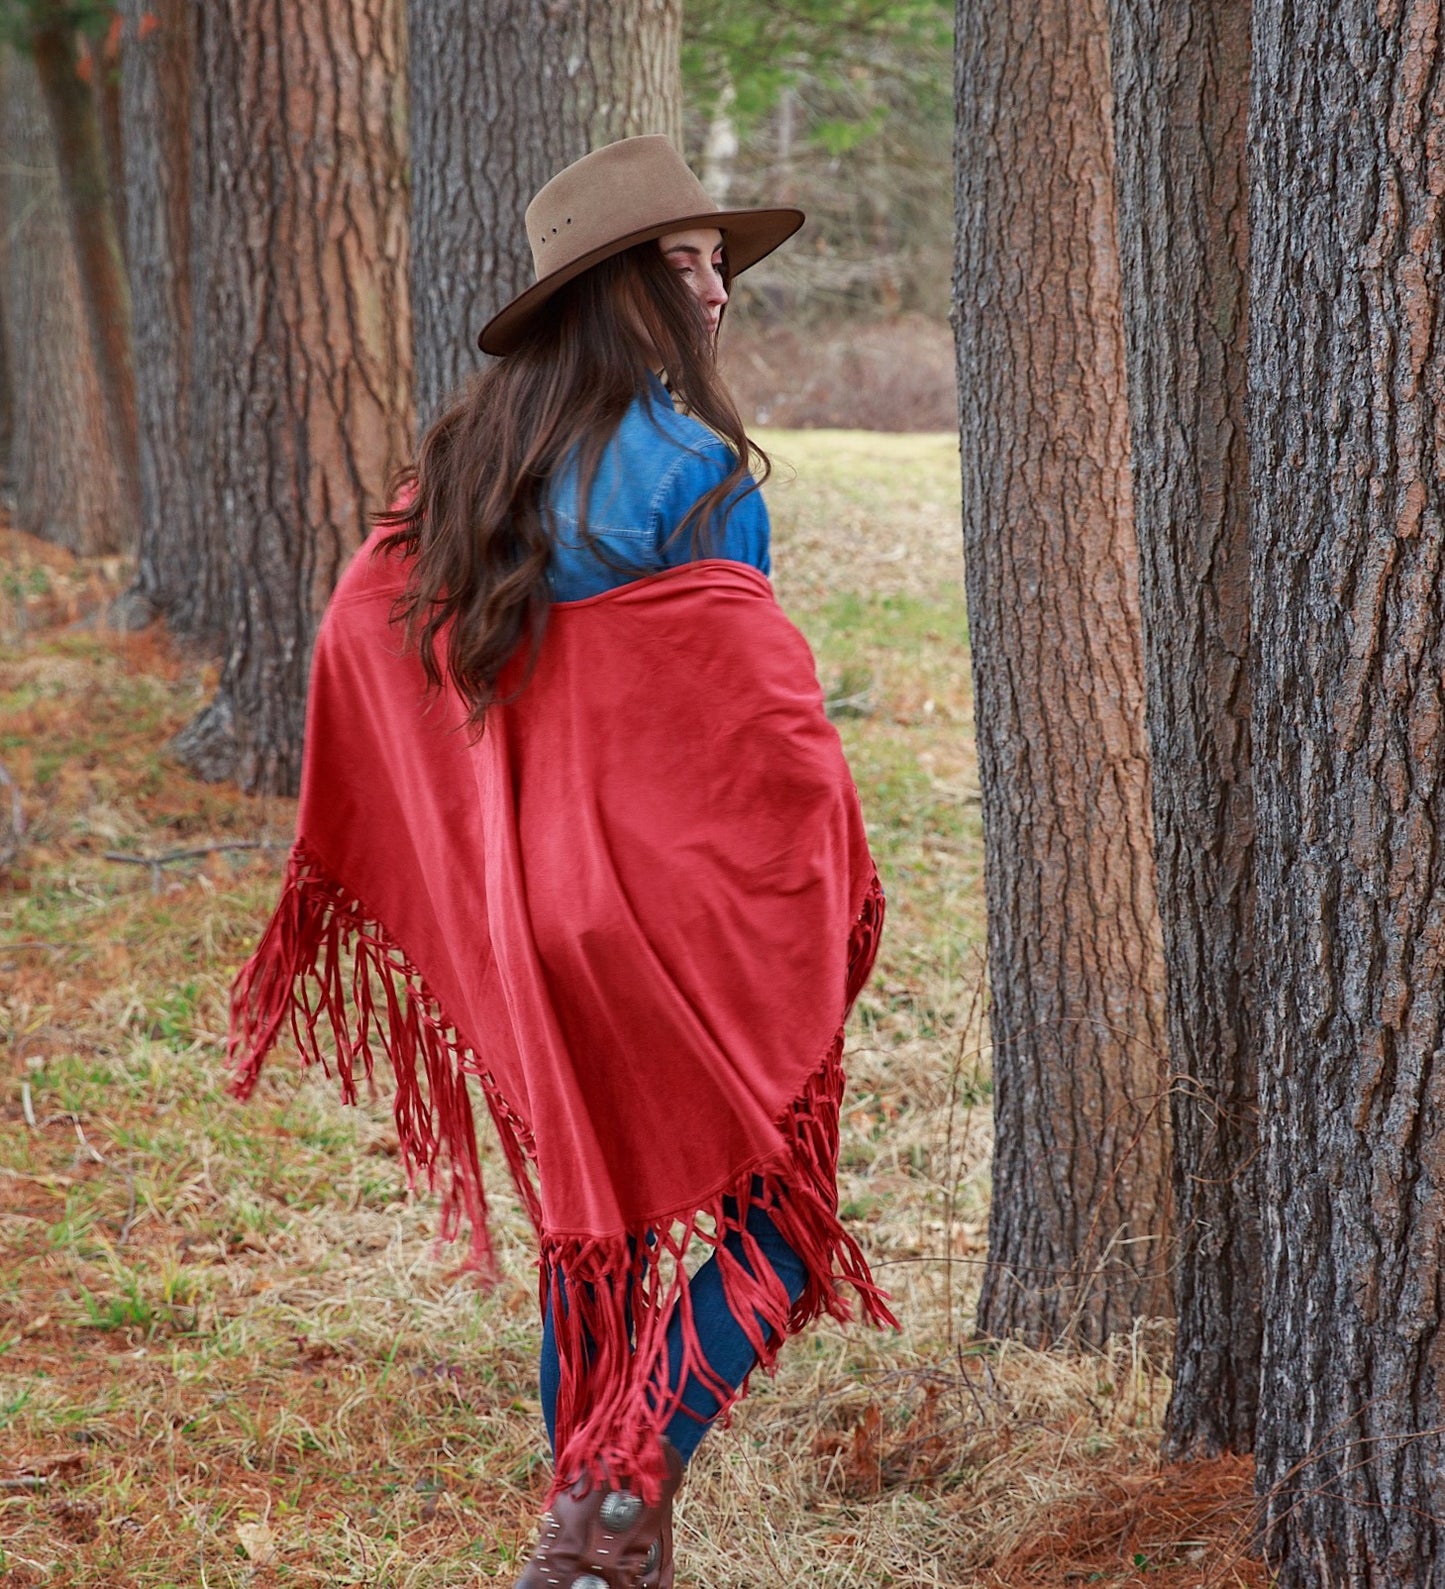 Load image into Gallery viewer, Tasha Polizzi Sierra Shawl in Paprika with fringe at 6Whiskey six whisky womens fall
